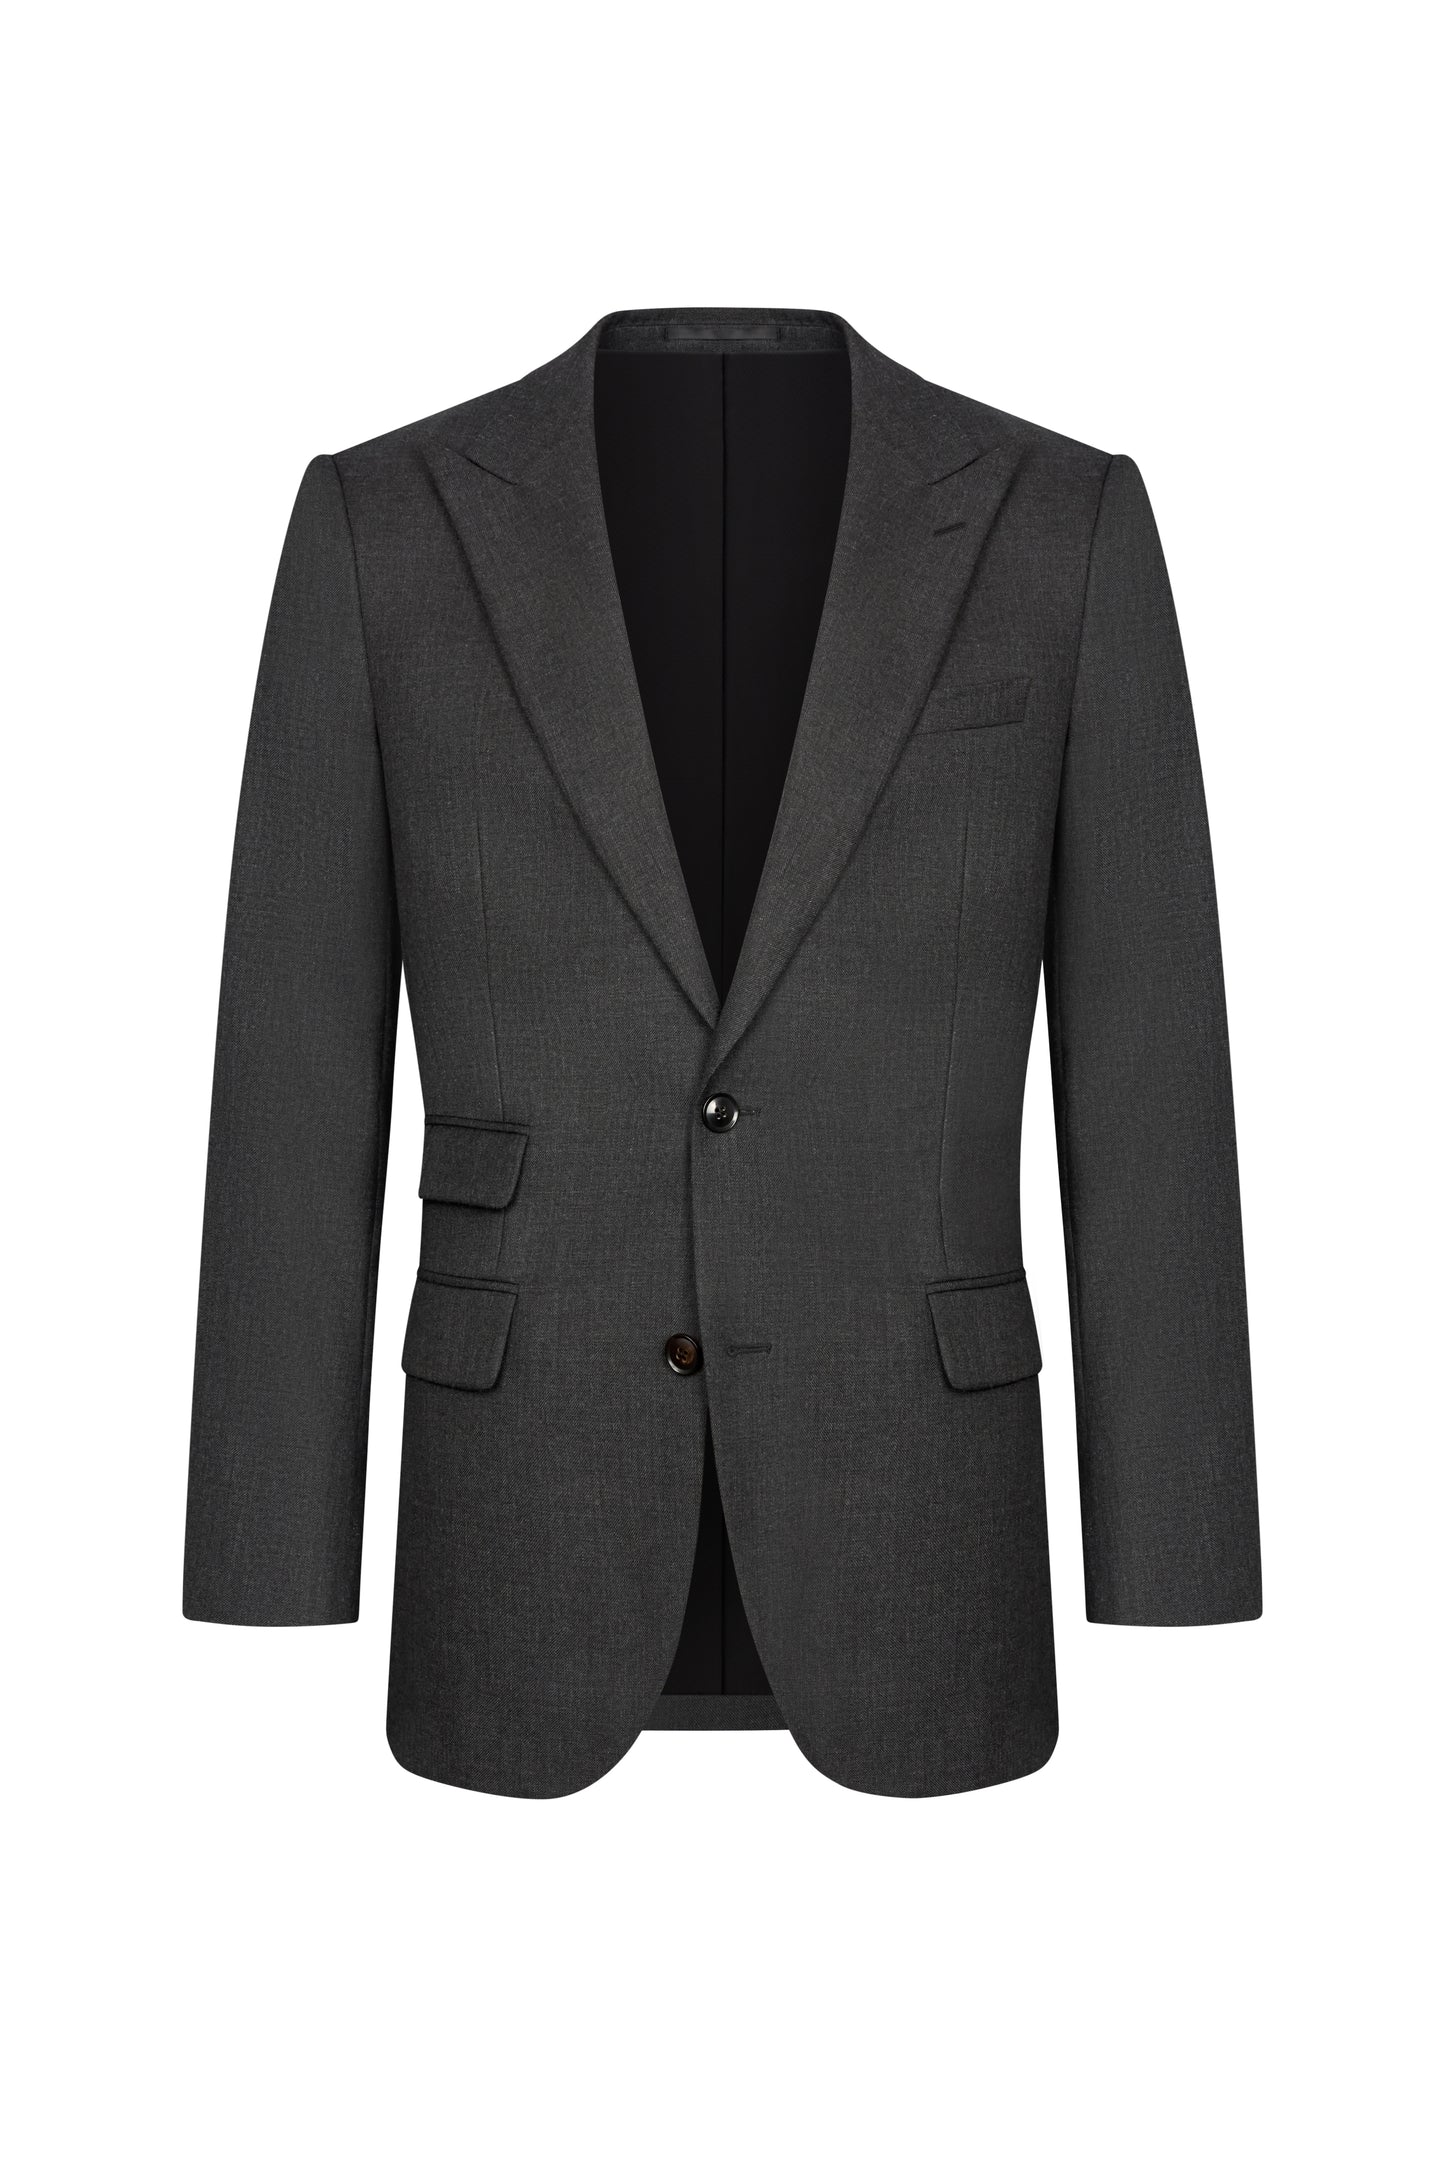 Holland & Sherry Charcoal Grey Twill Custom Suit